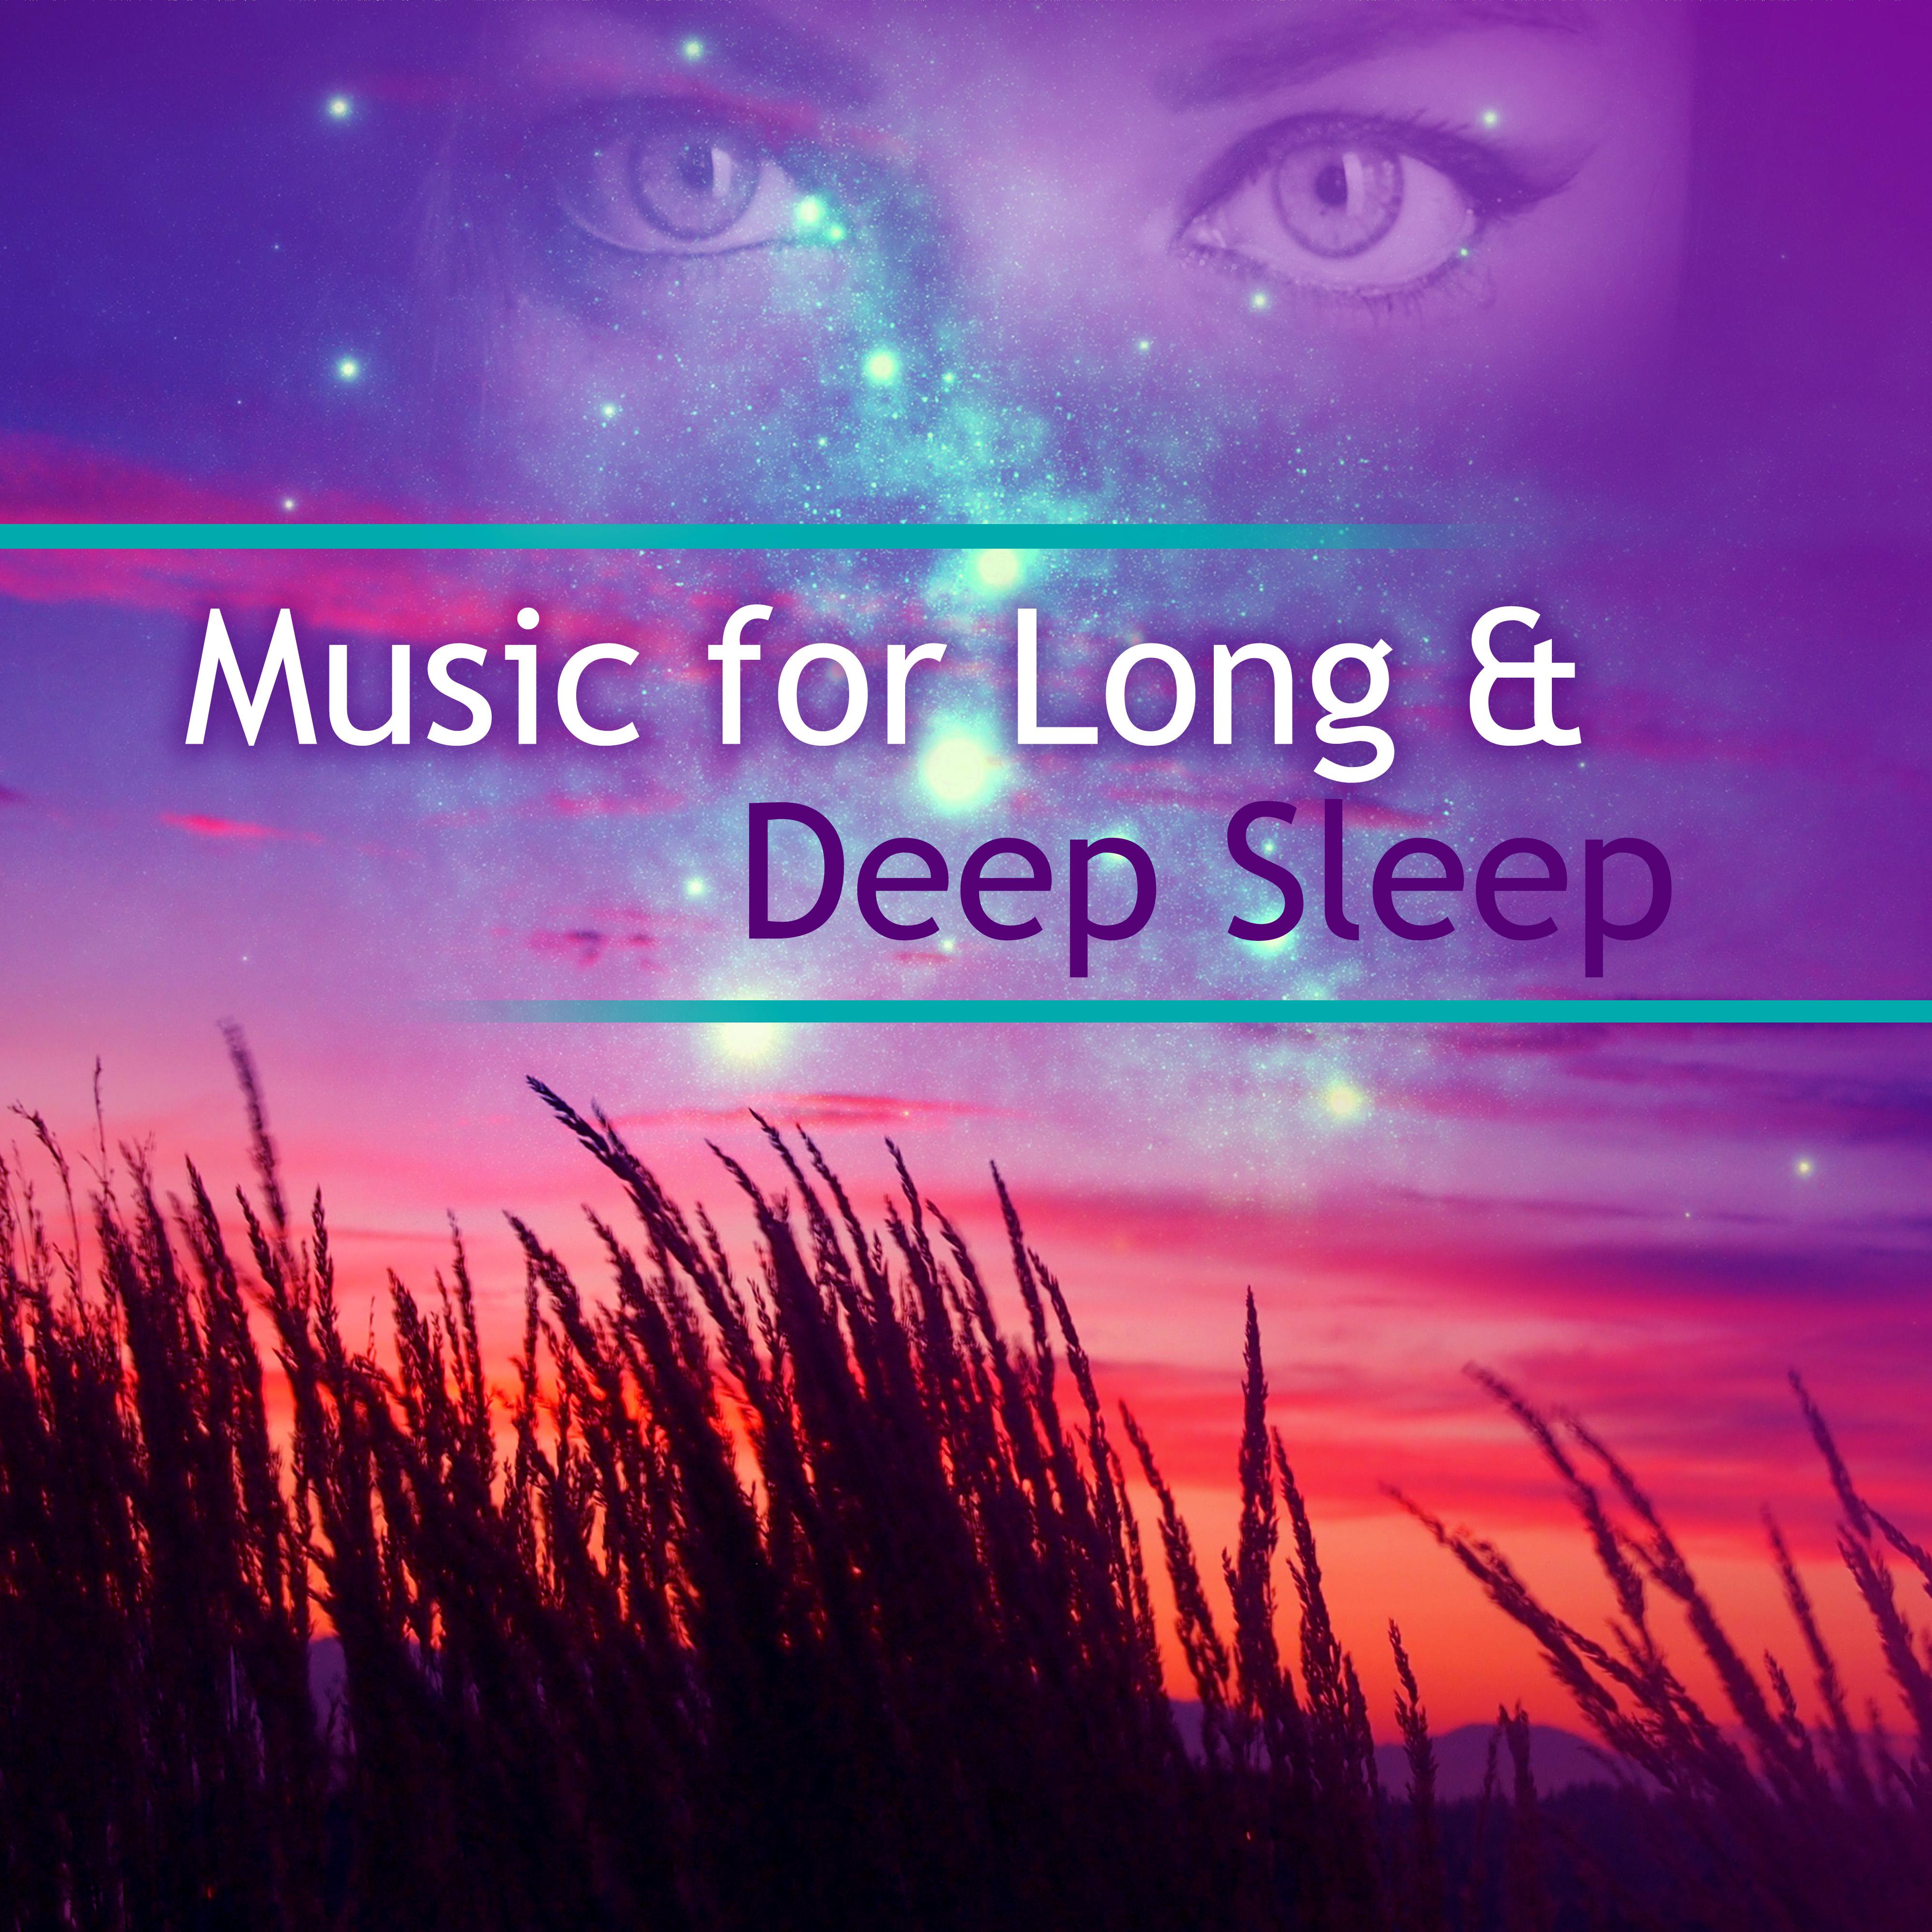 Music for Long  Deep Sleep  Stress Relief, Calming Sounds, Easy Listening, New Age Dreaming, Sleep Well